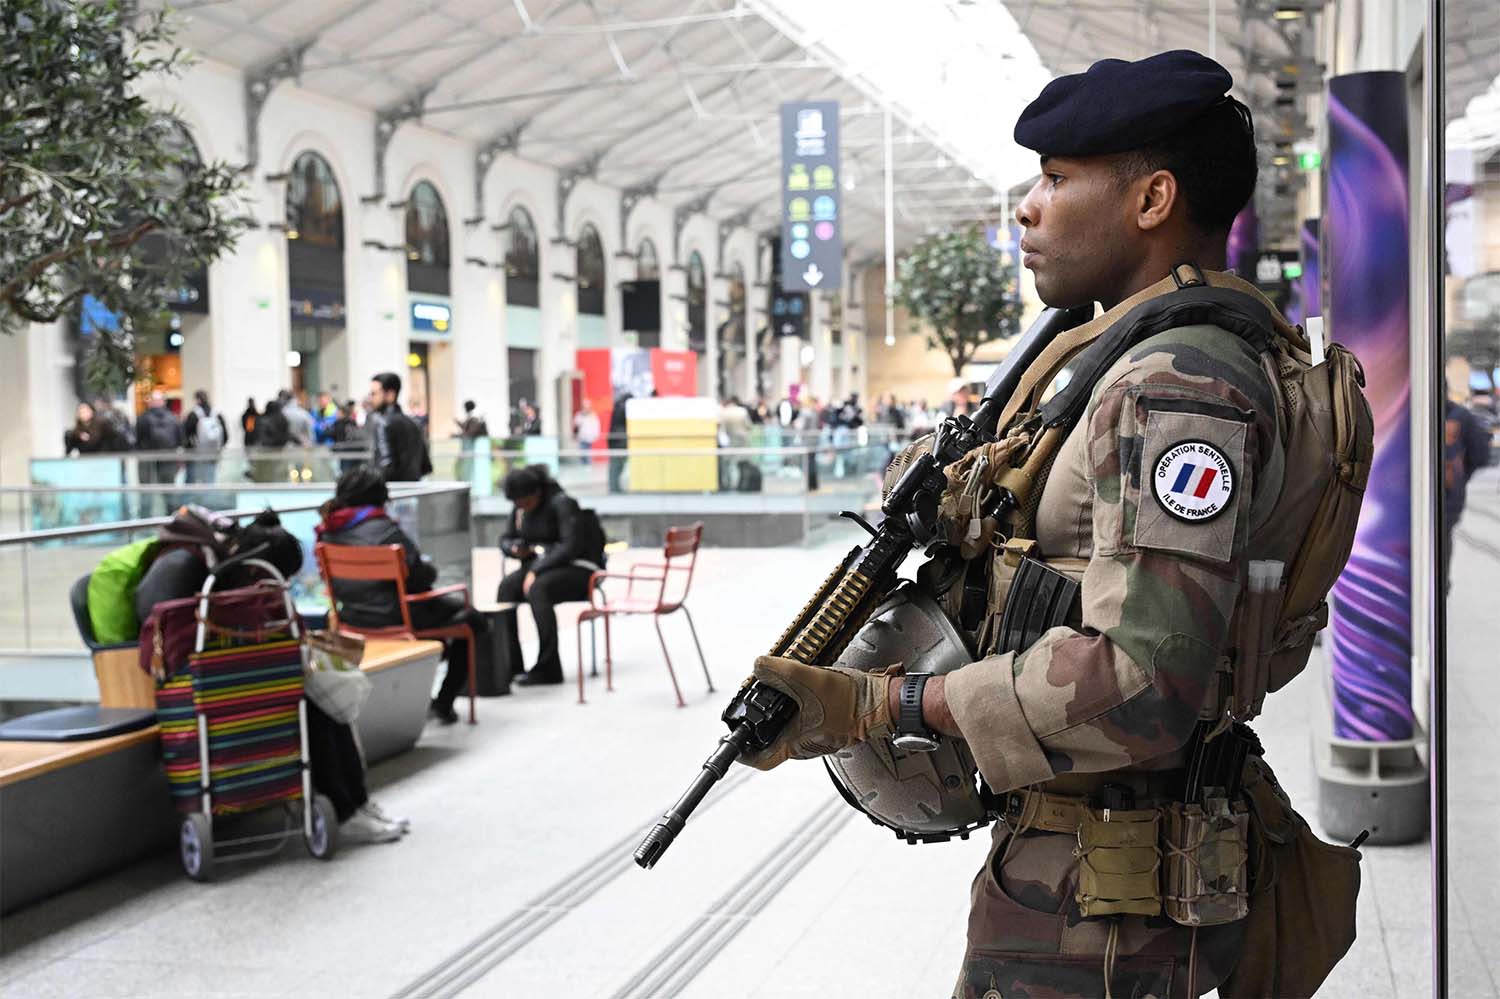 Security stepped up in public places across France